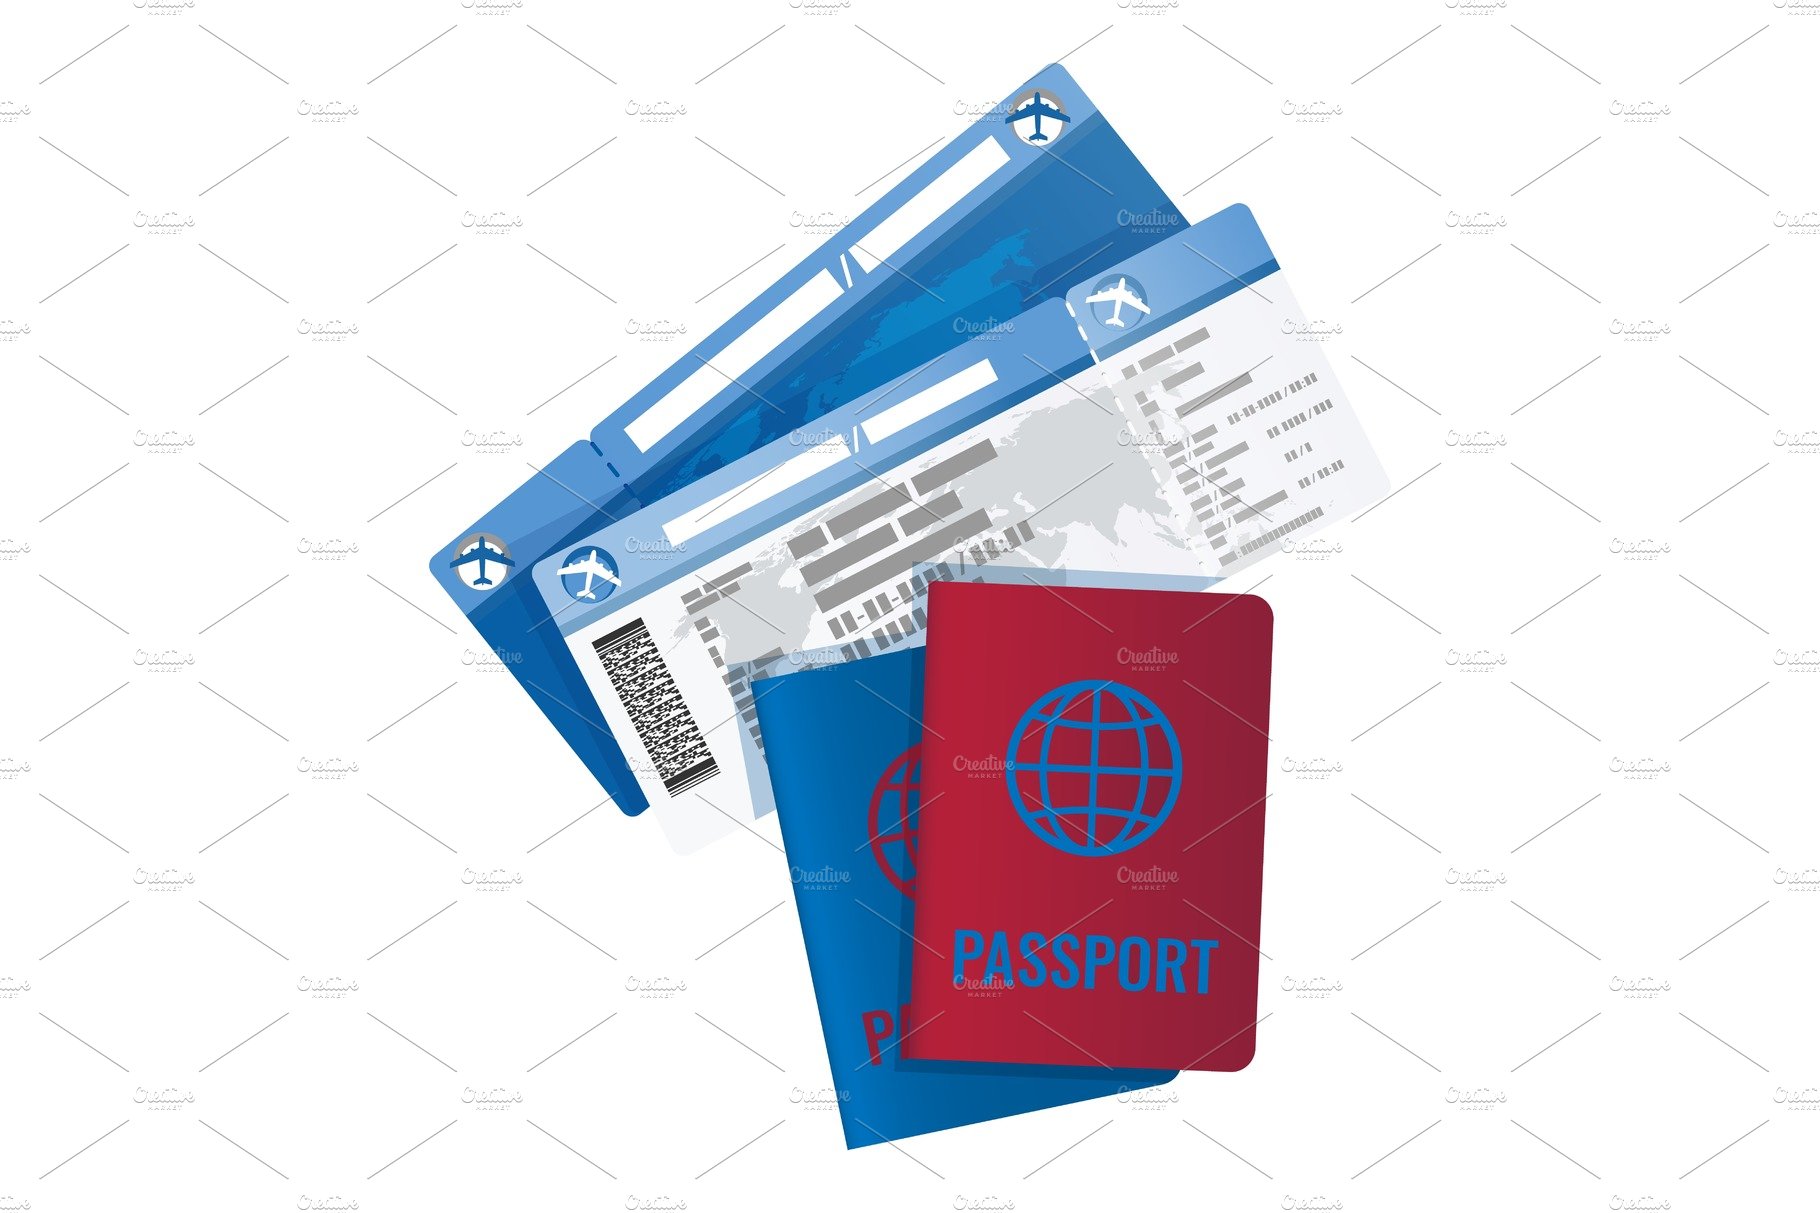 Tickets and passport for travelling cover image.